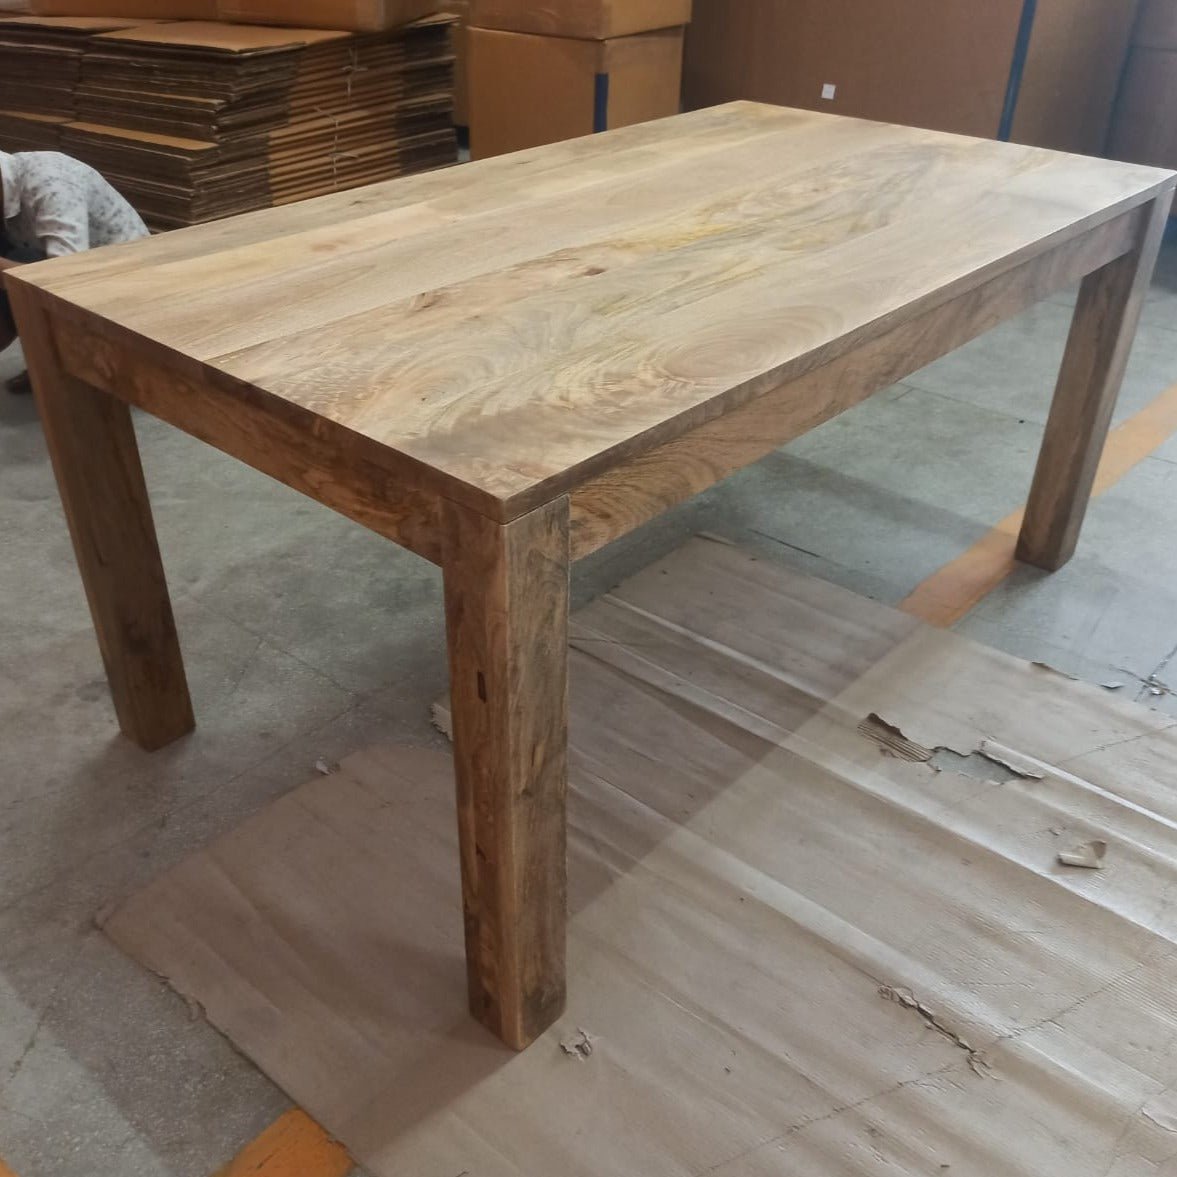 72 inch Sawana Mango Wood Dining Table - Rustic Furniture Outlet